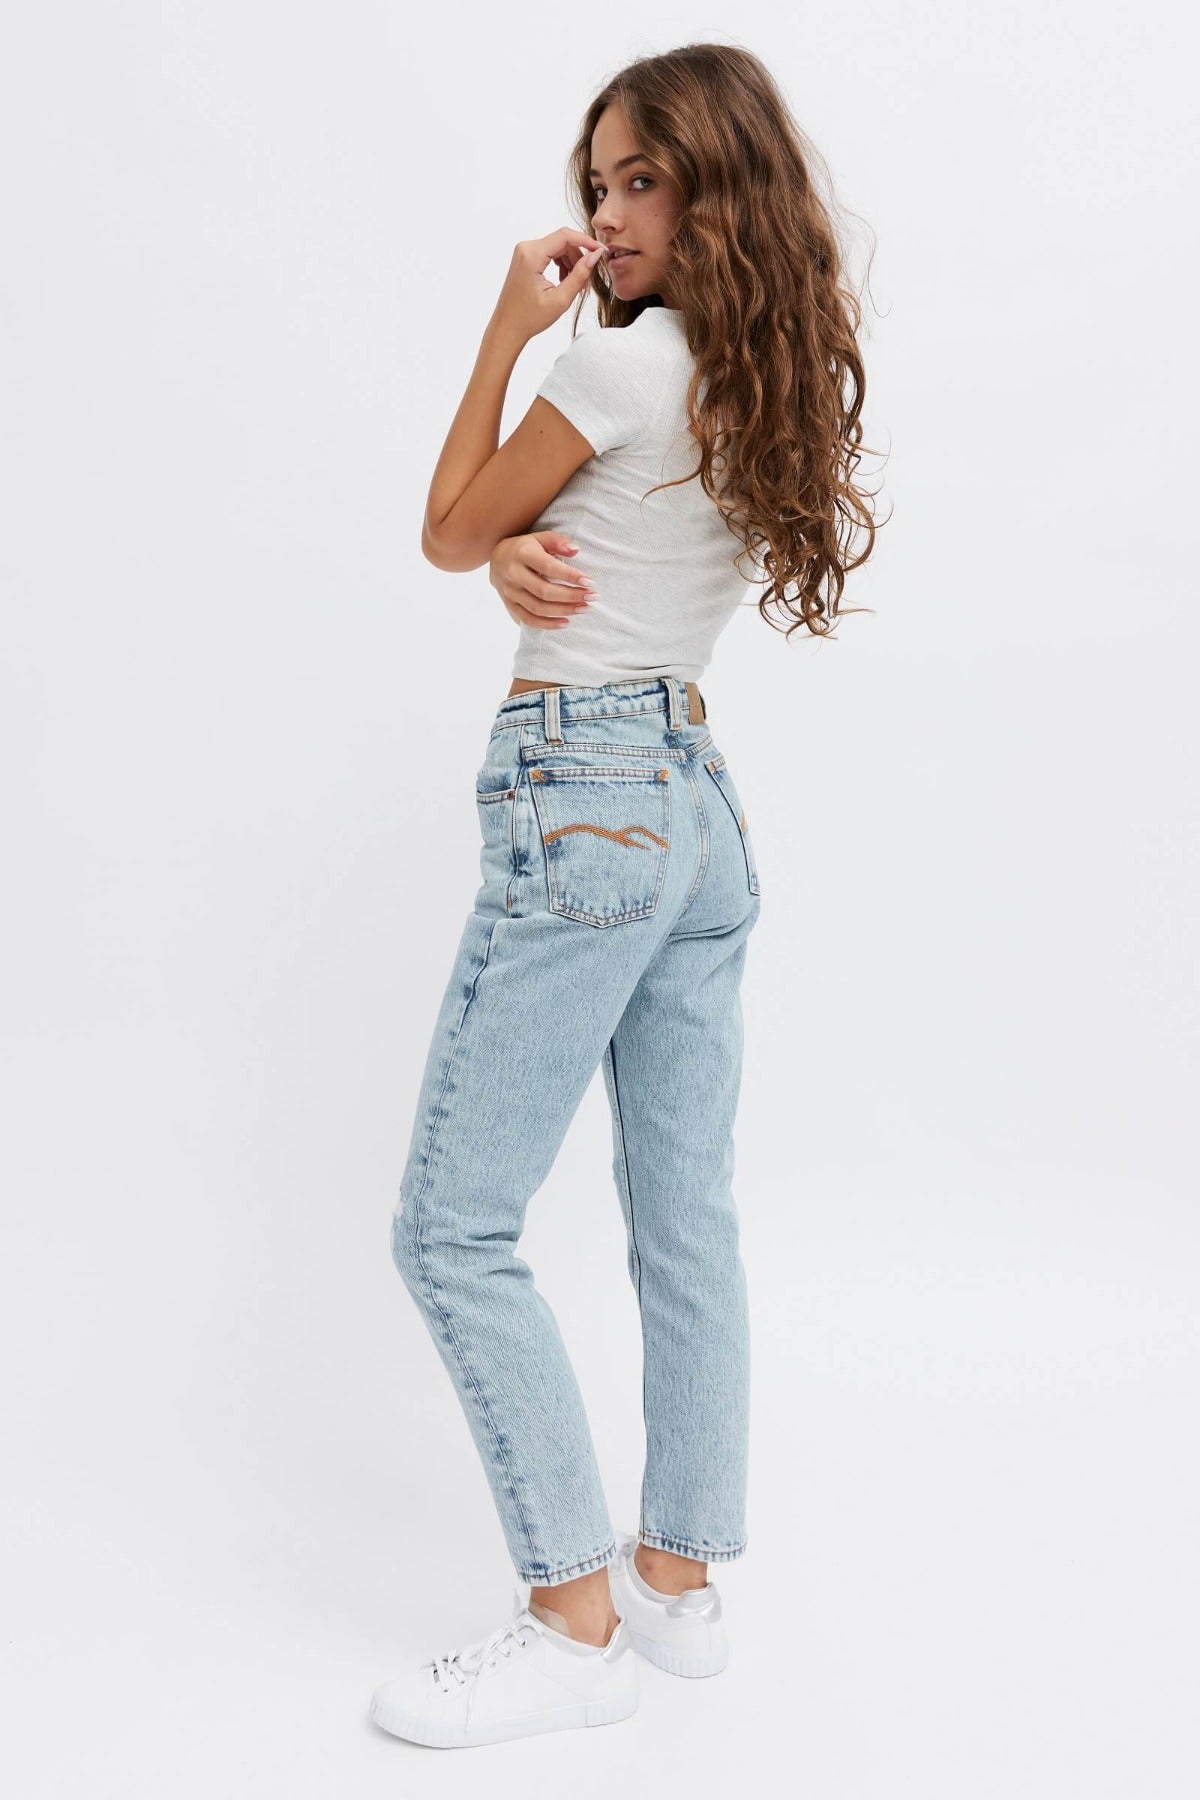 ripped organic denim jeans. Ethical pants